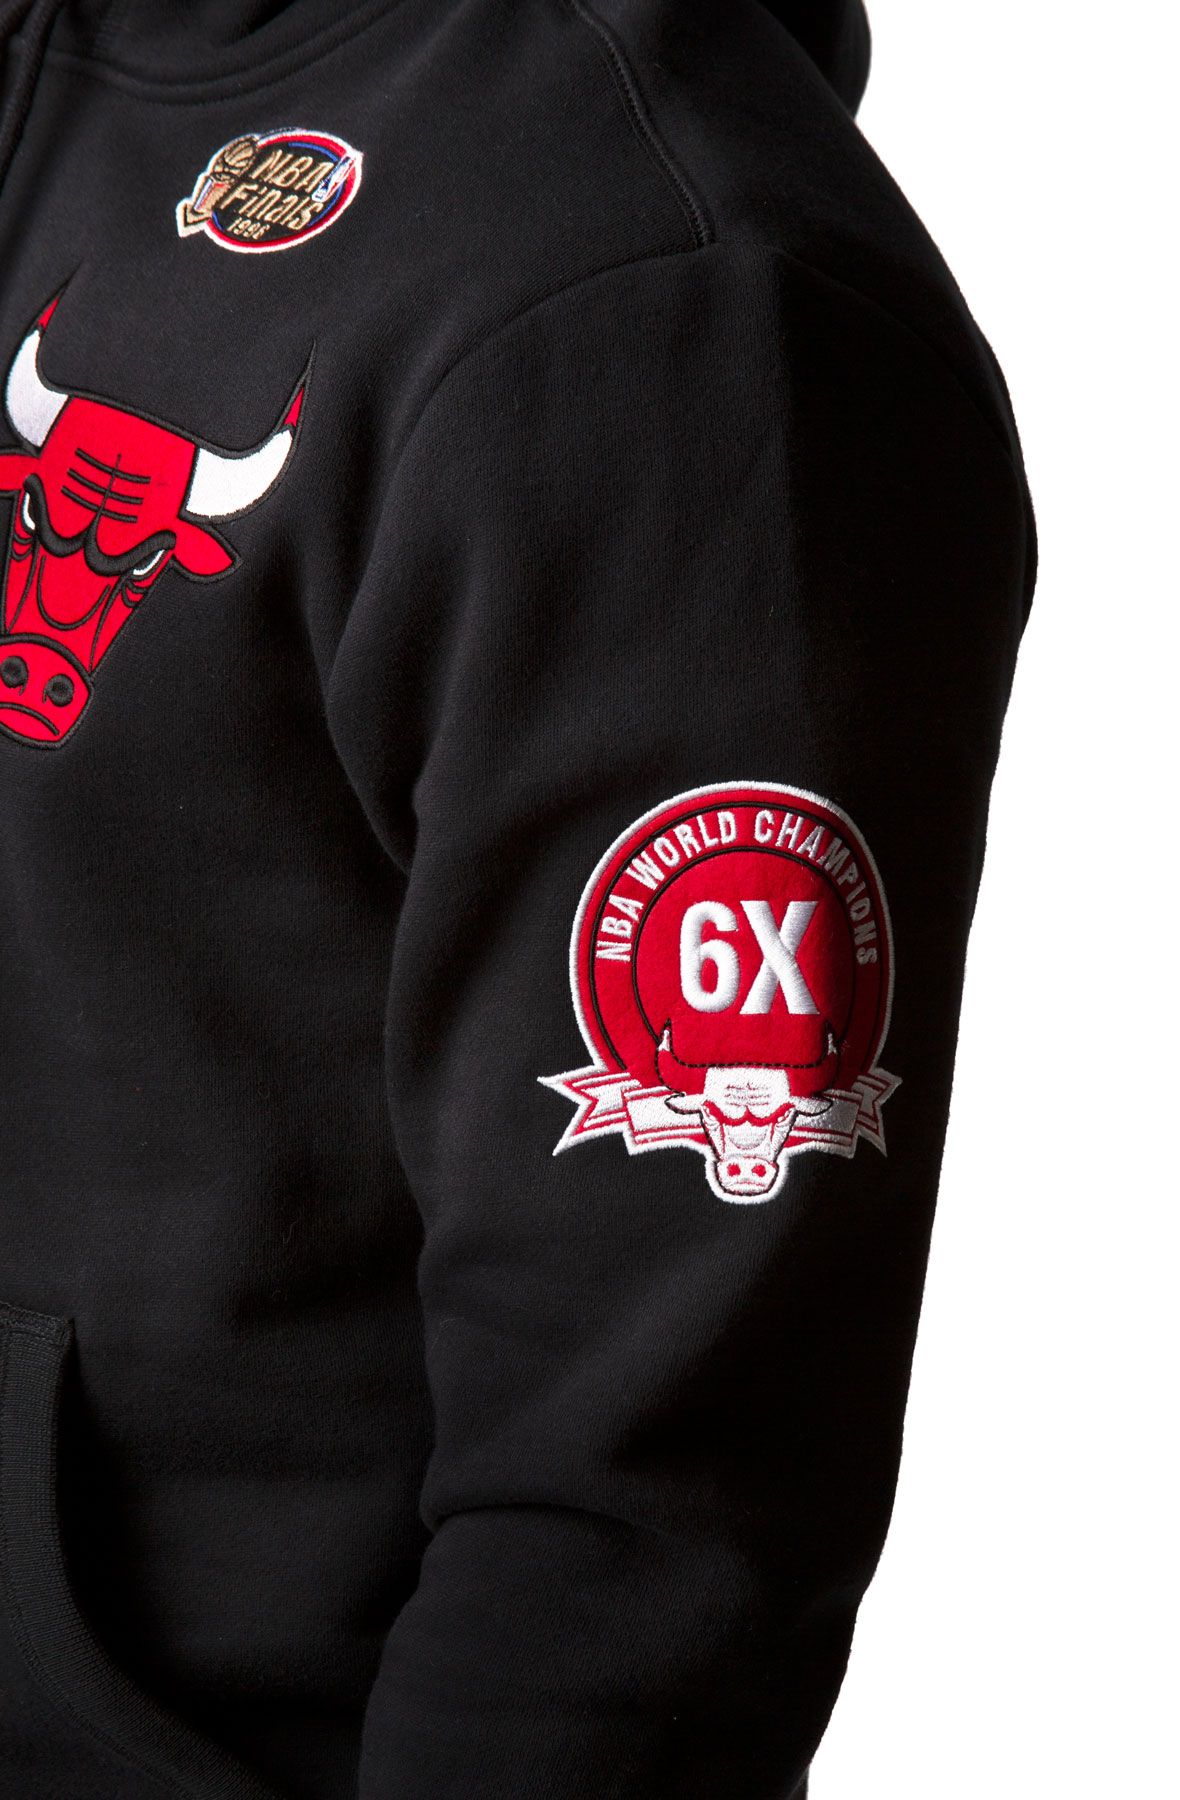 Mitchell & Ness Mens NBA Chicago Bulls Premium Fleece Hoodie  FPHD1040-CBUYYPPPGHRD Grey Heather/Red